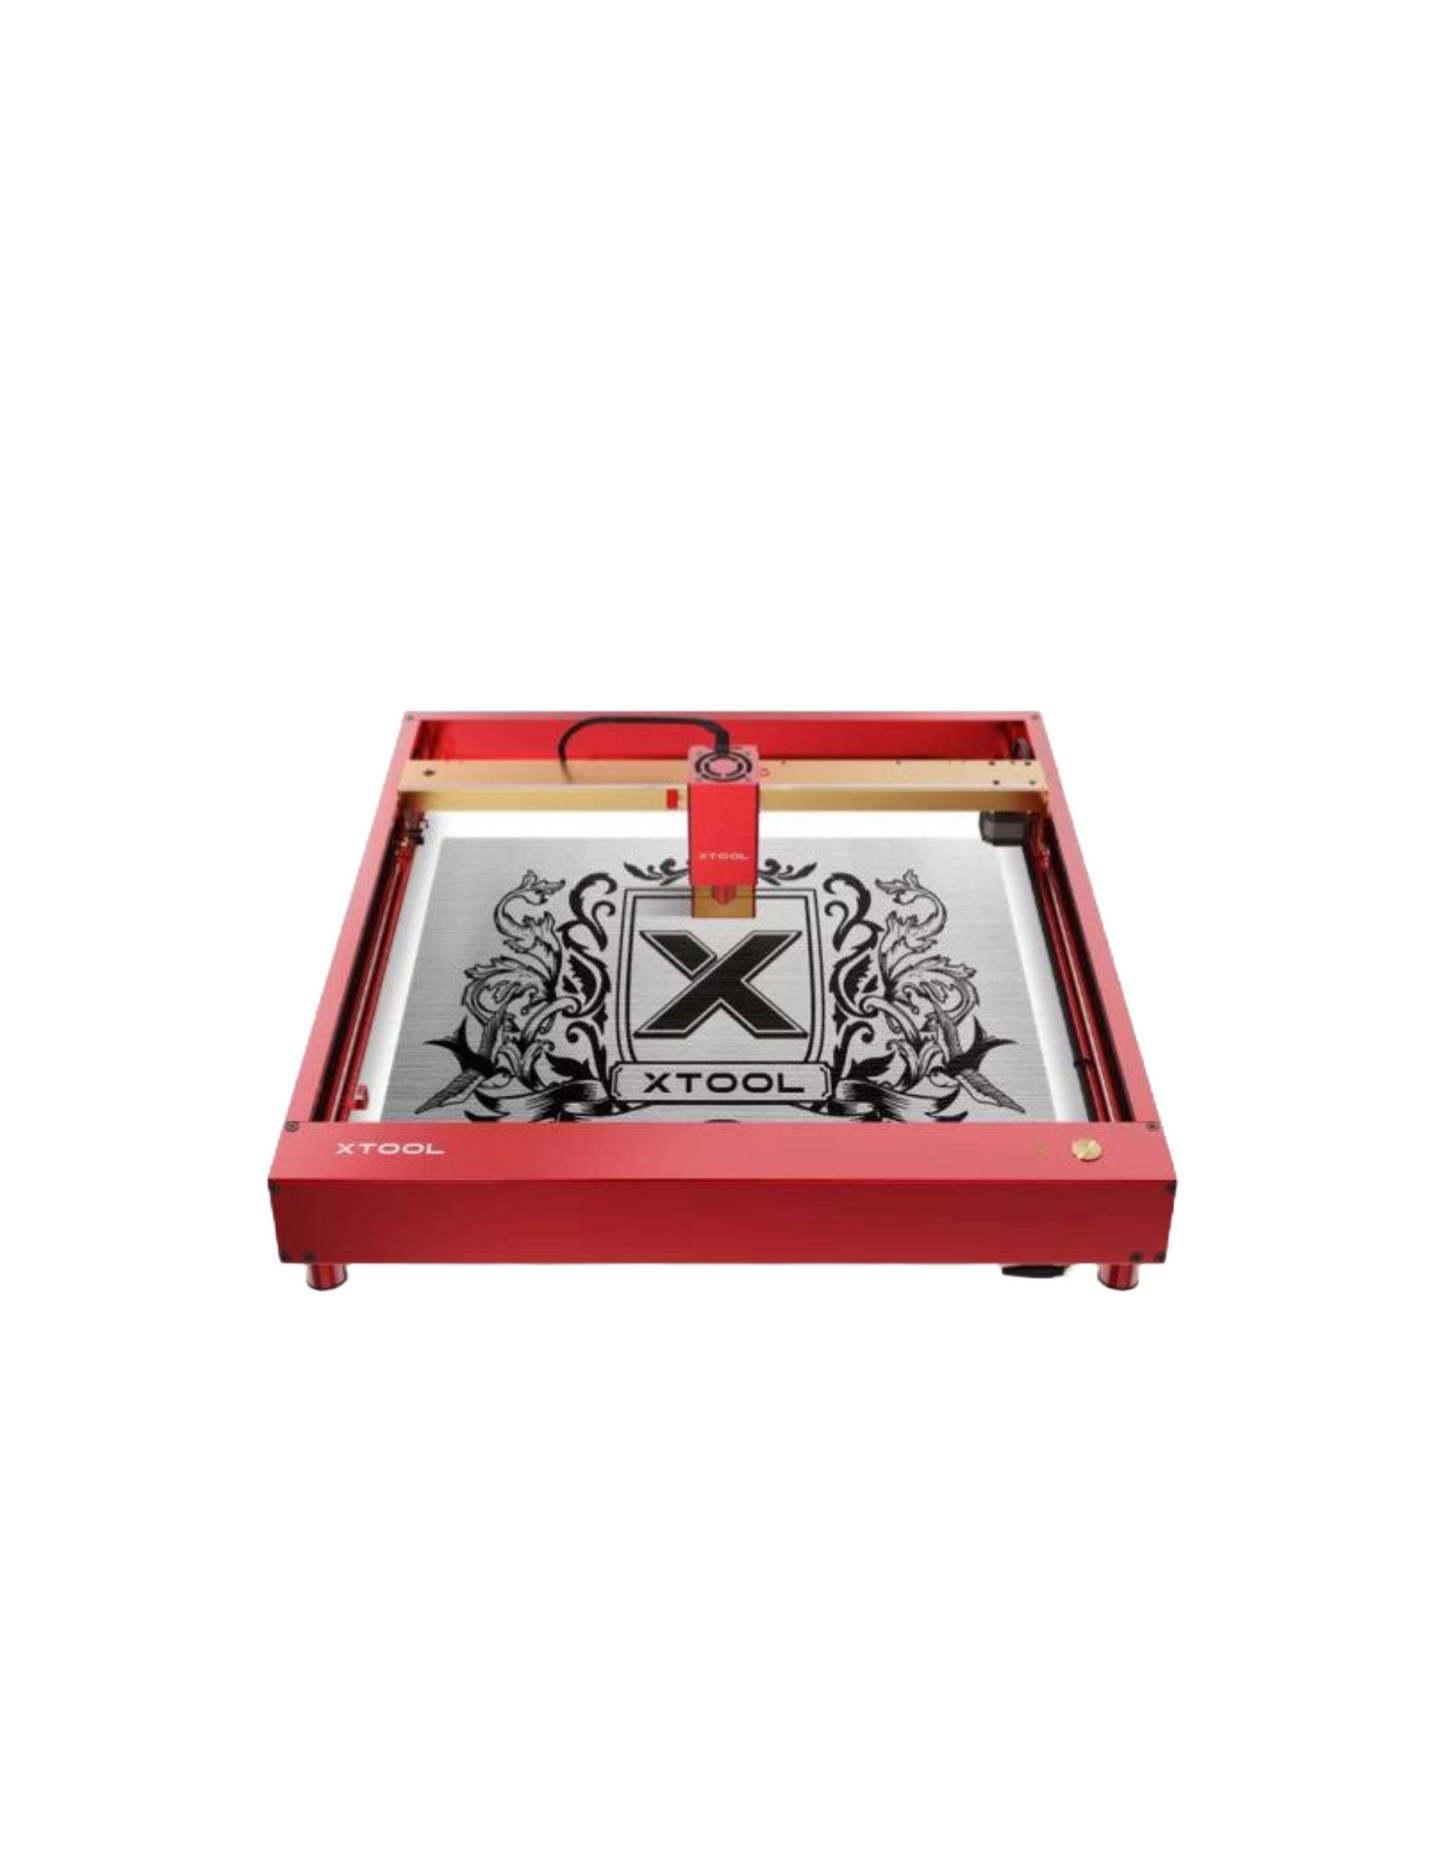 X-Tool D1 Pro 20W: Higher Accuracy Diode DIY Laser Engraving & Cutting Machine